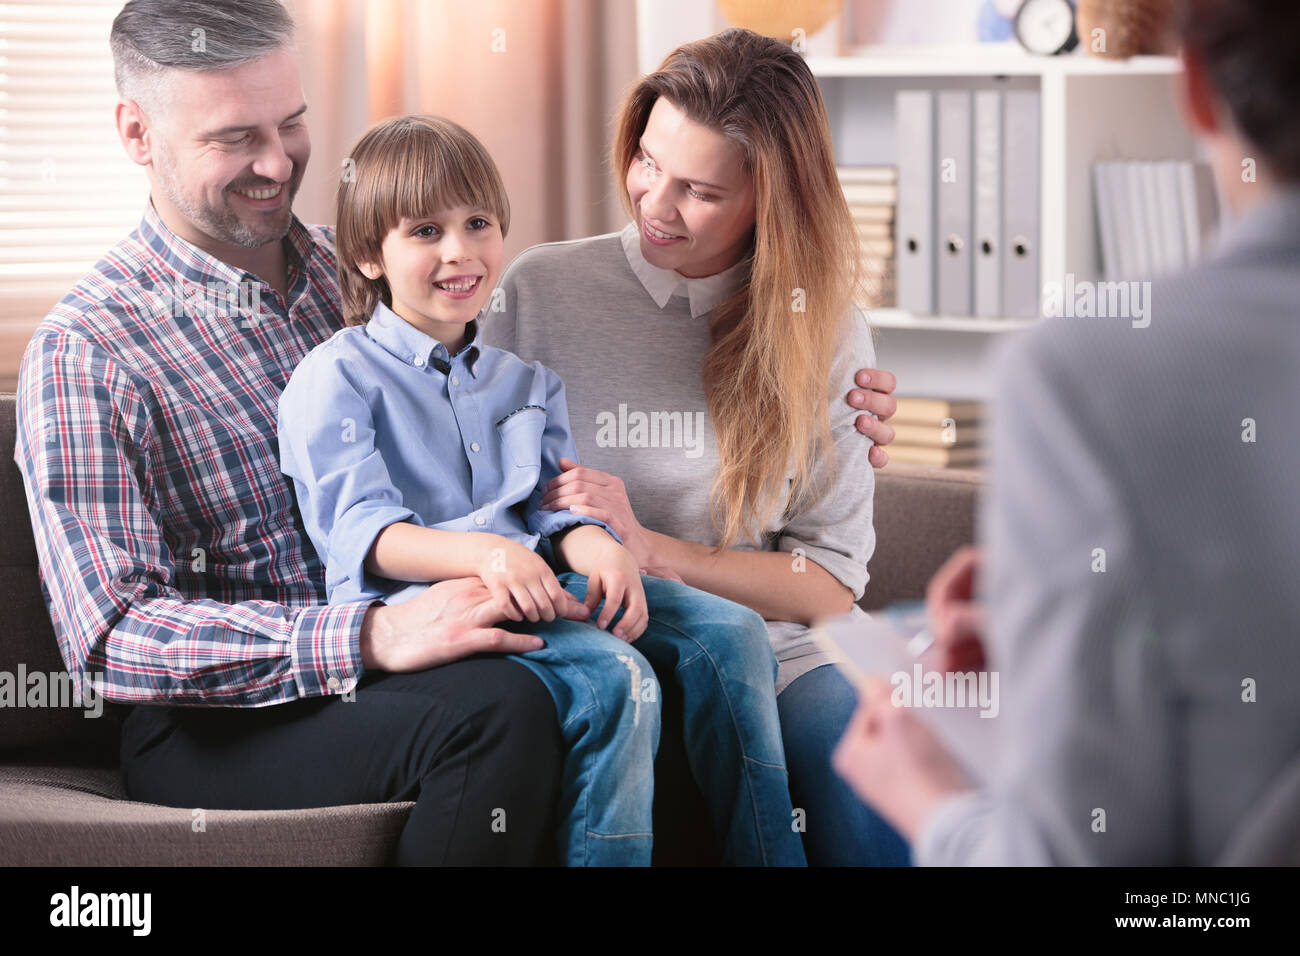 Happy kid sitting on his father's lap next to his mother during a meeting with school counselor Stock Photo